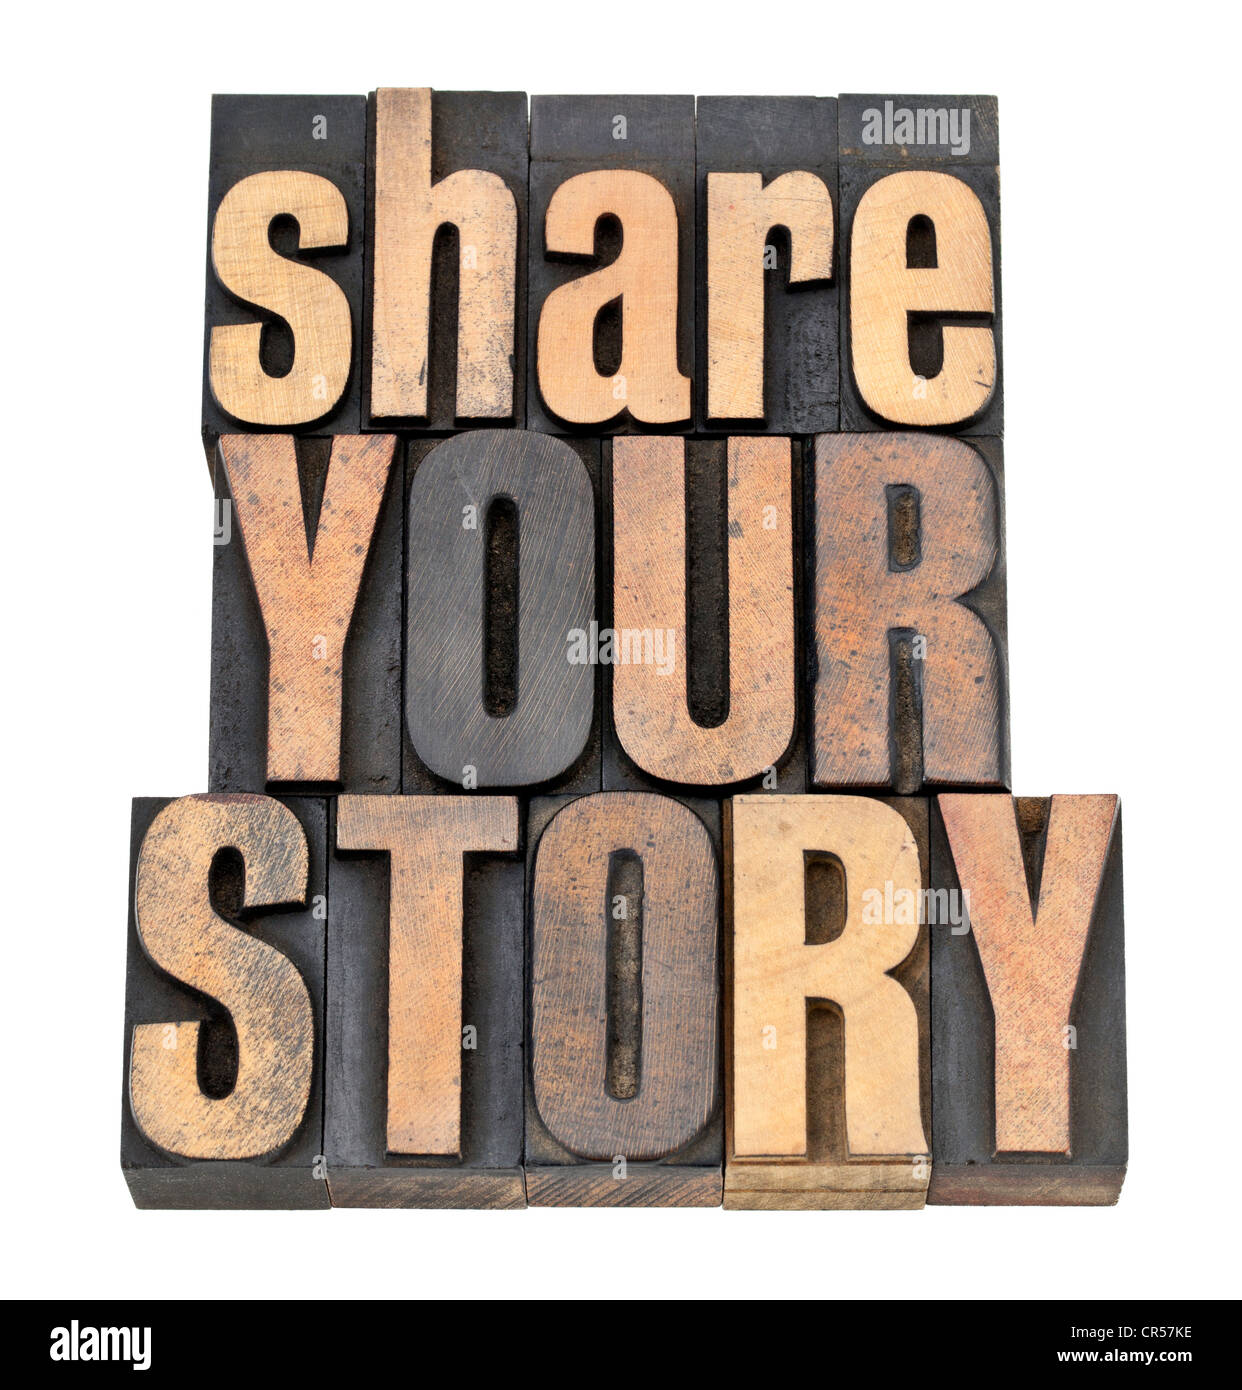 share your story phrase - isolated text in vintage letterpress wood type Stock Photo